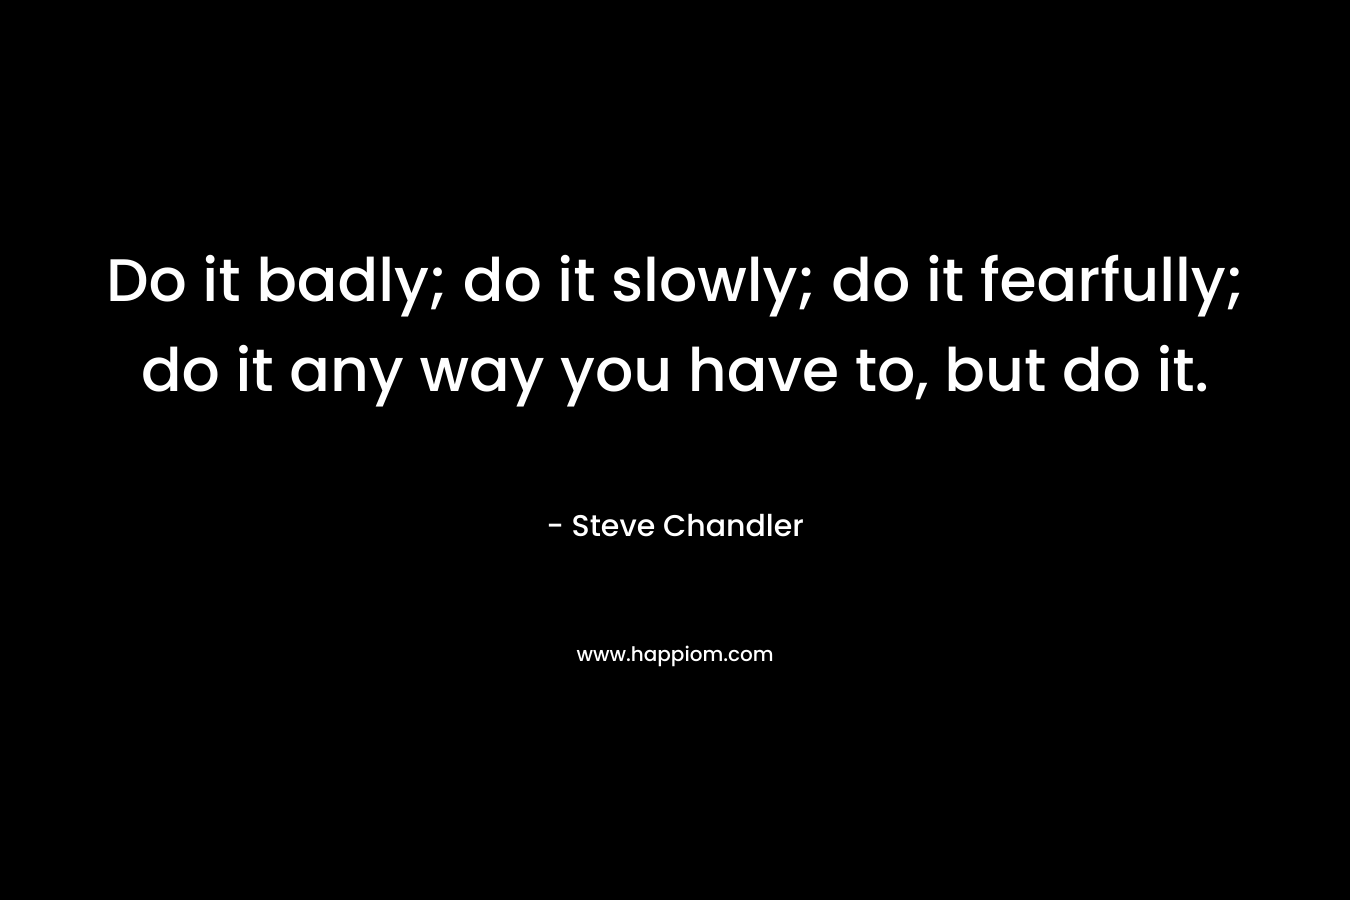 Do it badly; do it slowly; do it fearfully; do it any way you have to, but do it. – Steve Chandler